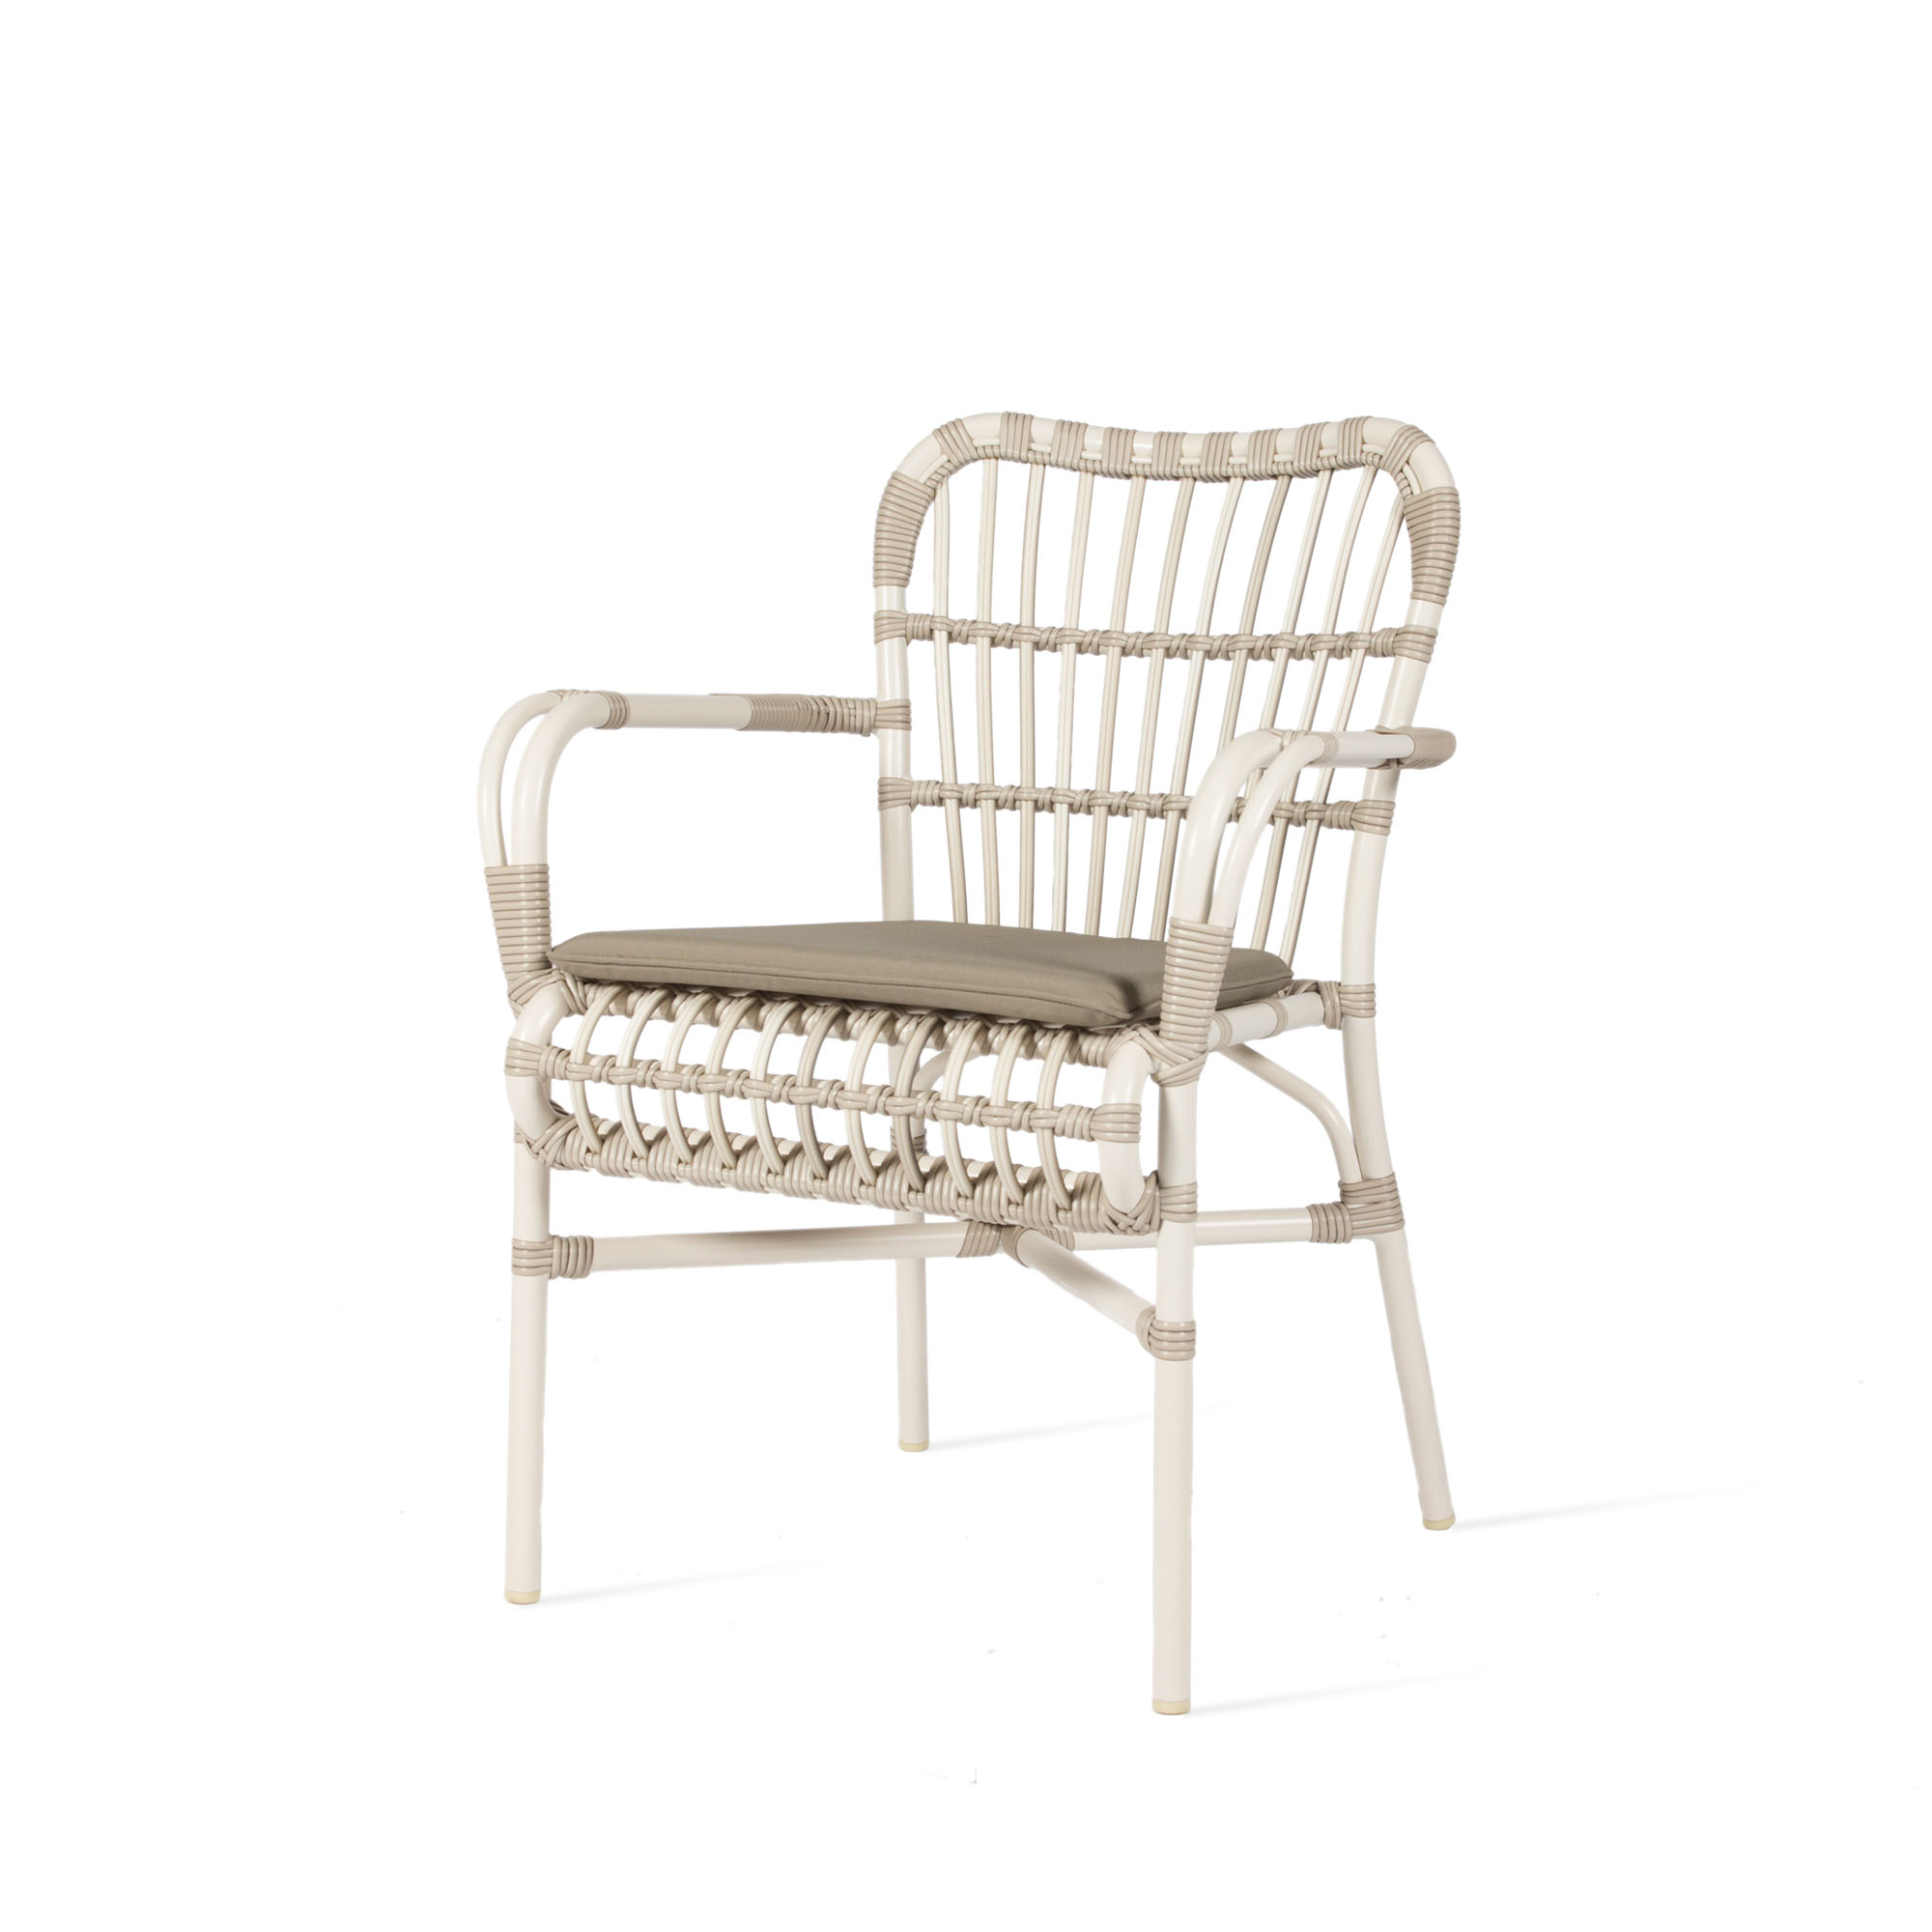 Indulge in the sophistication of outdoor dining with this elegant white Aluminium and weave armchair, featuring a plush taupe seat pad for added comfort.